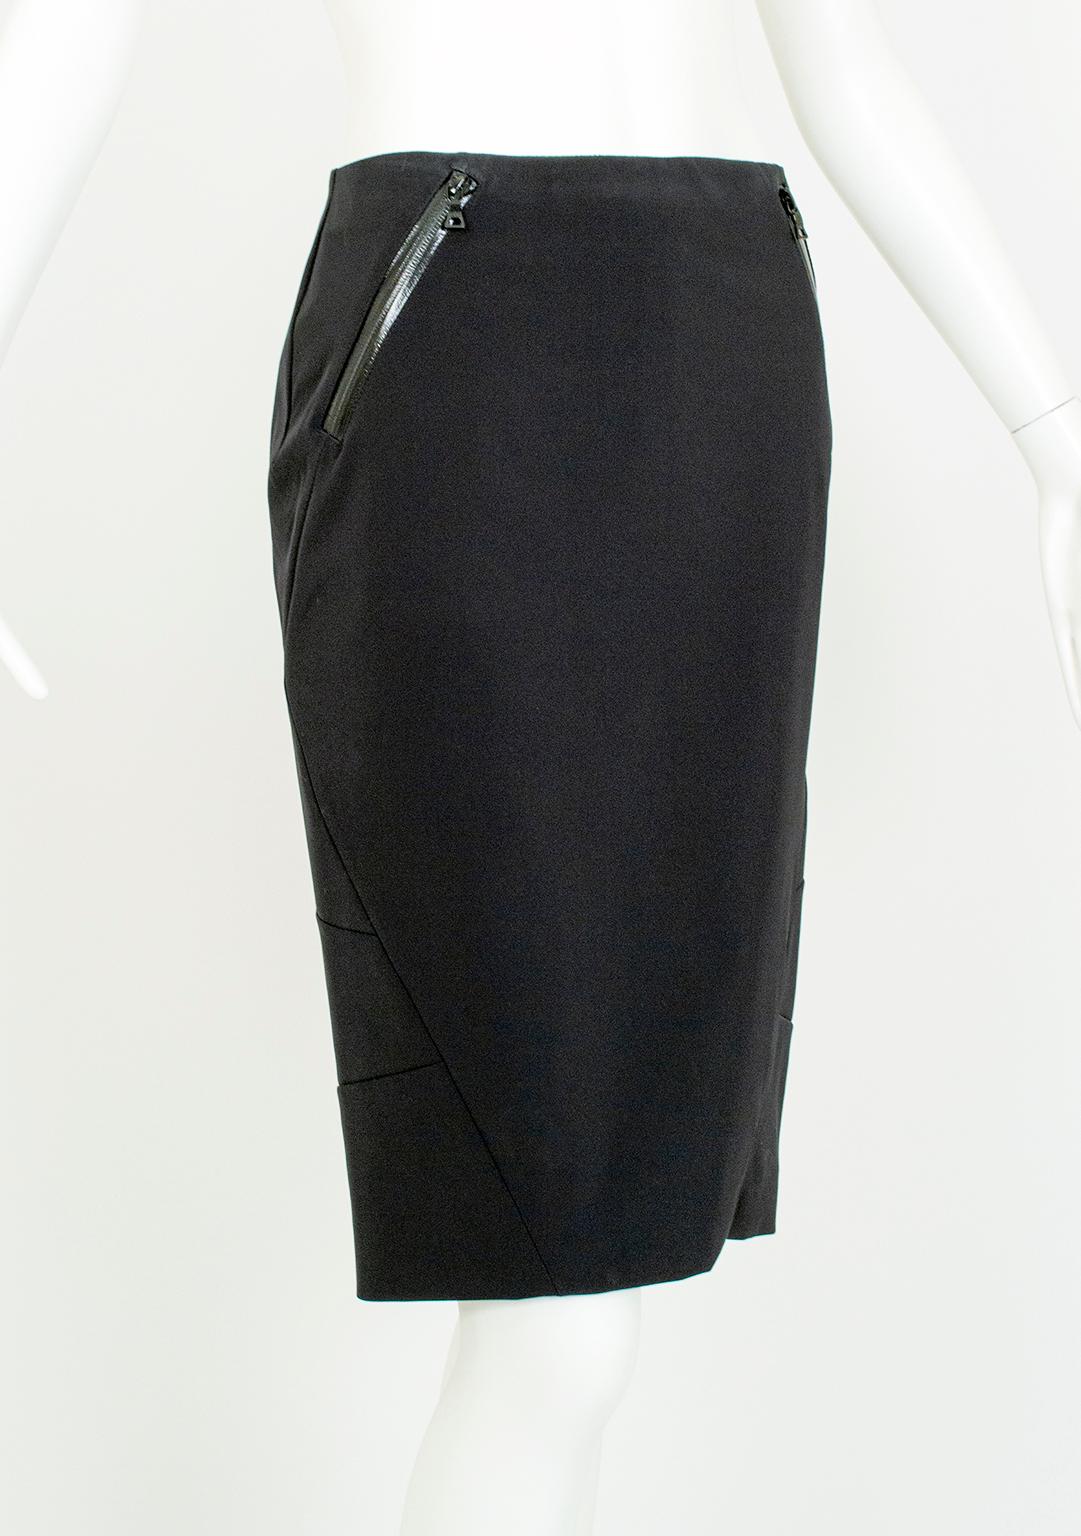 At once both devastatingly sexy and still powerfully professional, this pencil skirt combines trompe-l’oeil corset seams and shiny vinyl-trimmed zippers for a gentle dominatrix effect. The rear zippered vent can be kept fully closed for a hobble